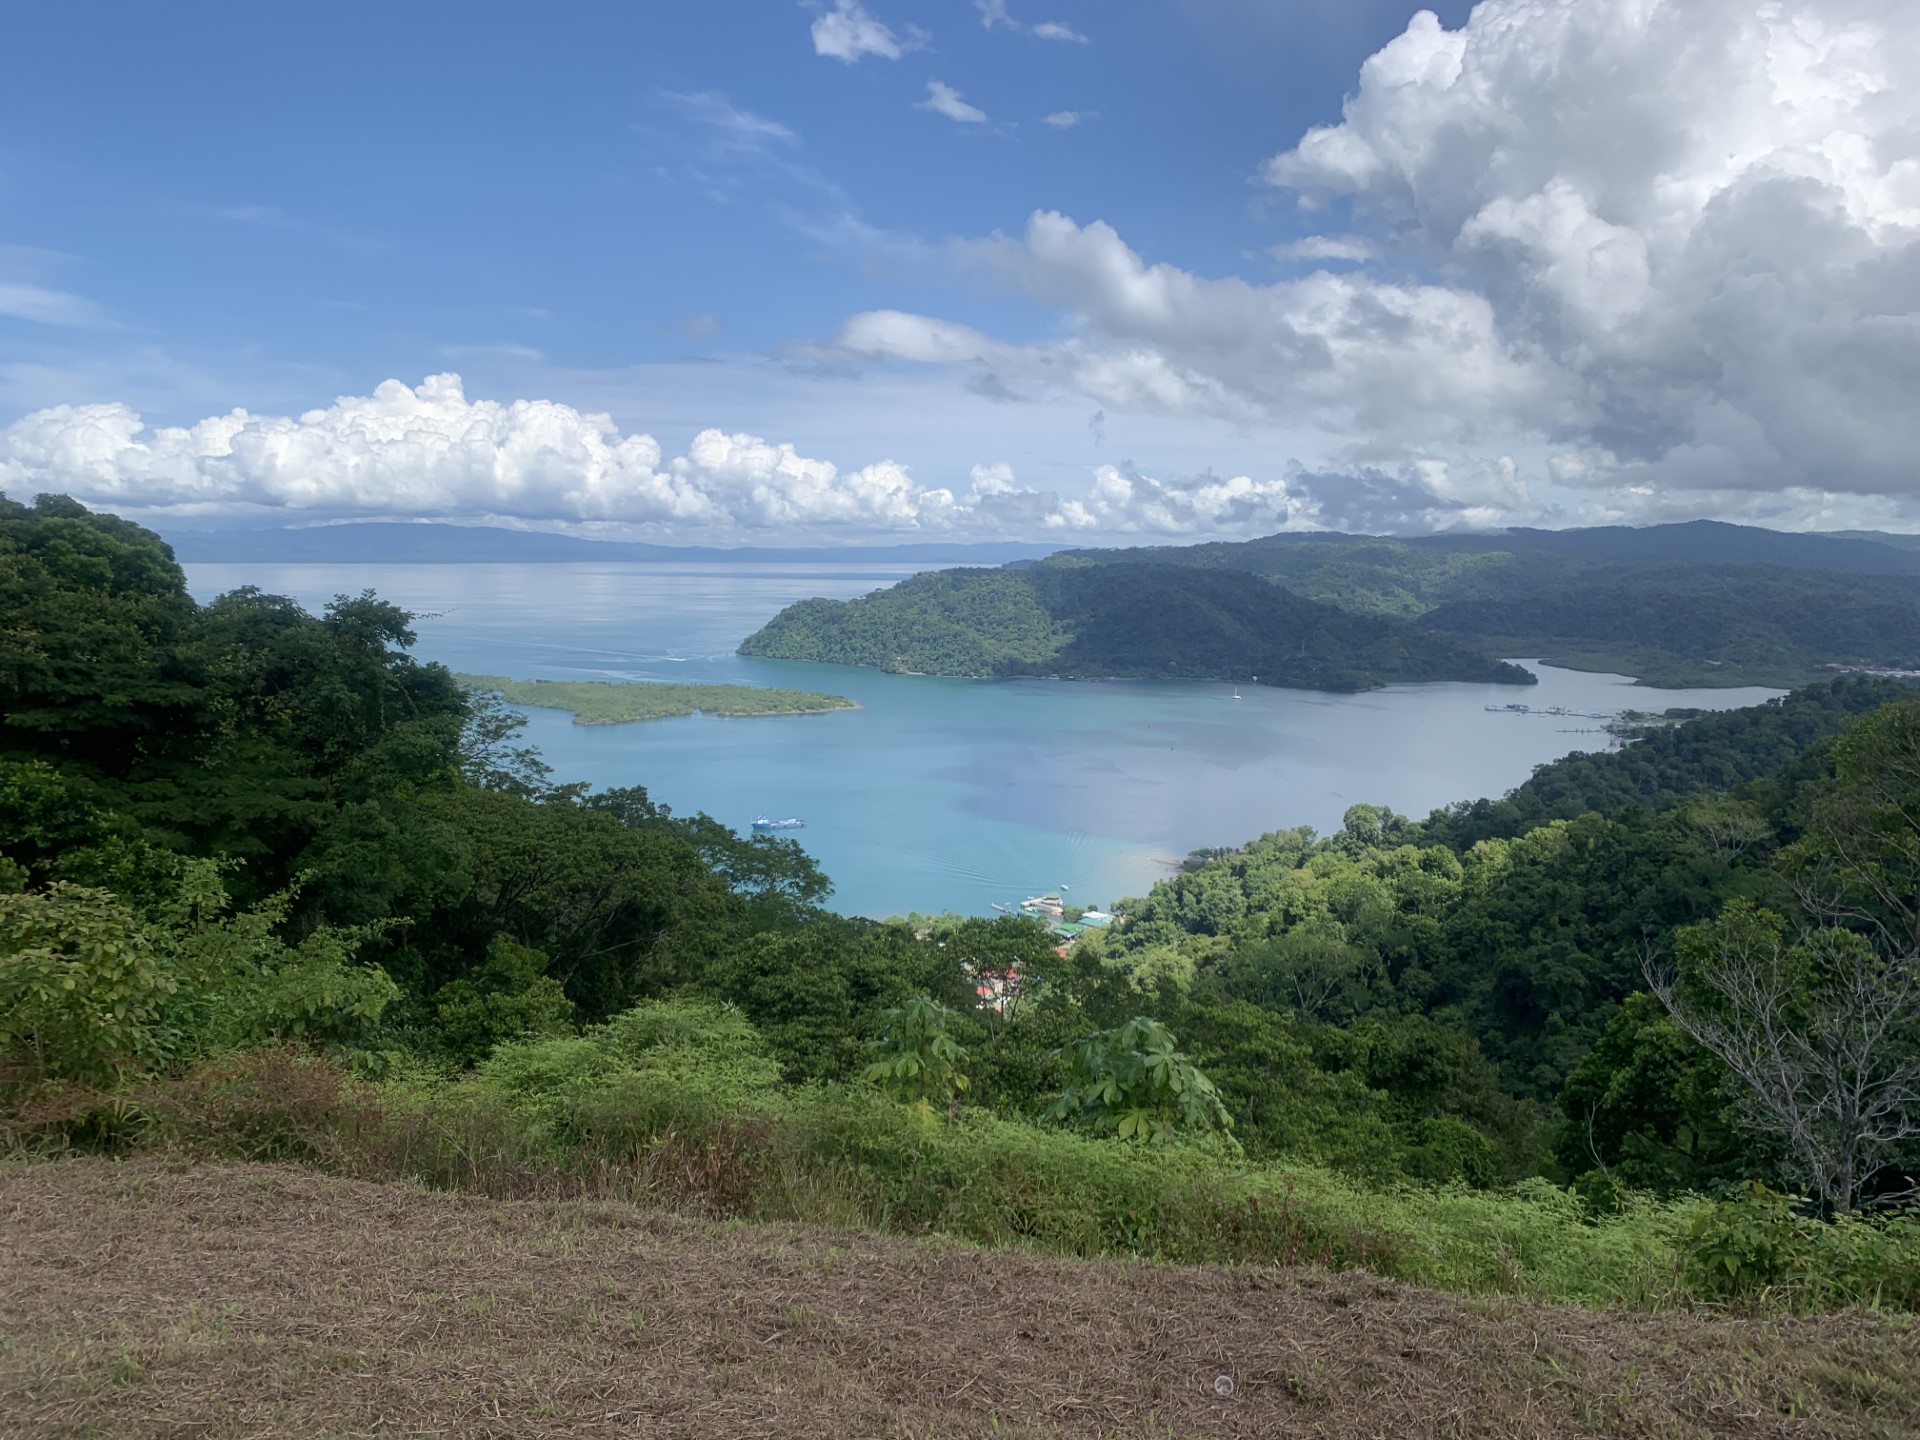 Southern Costa Rica view in Spring 2023. Photo by Charles Hall.